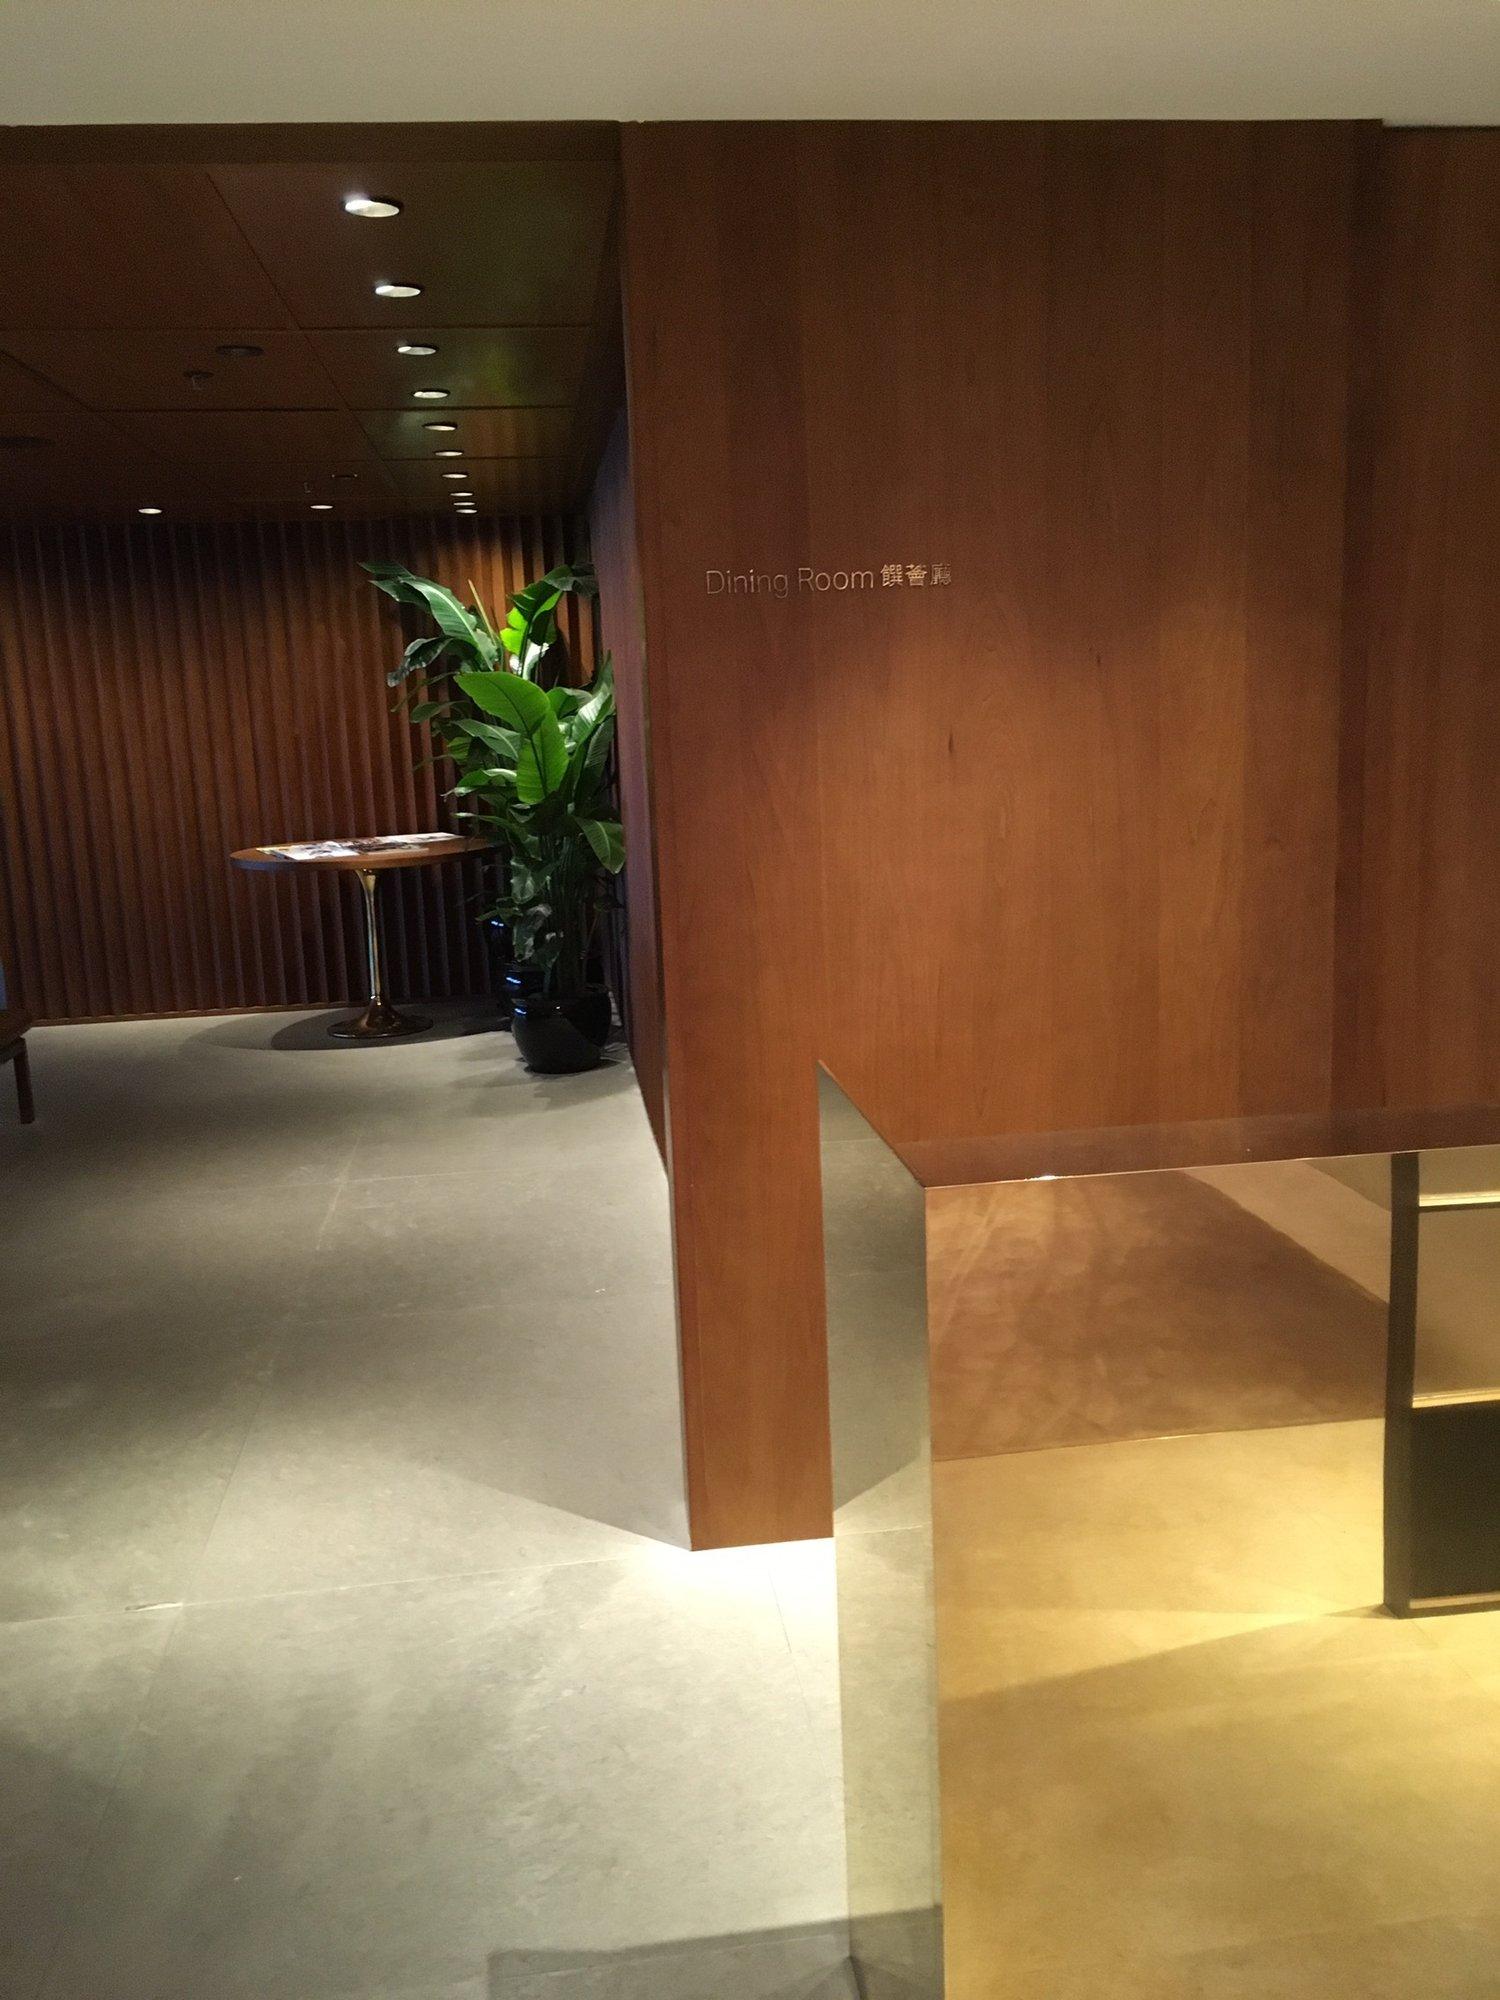 Cathay Pacific The Pier First Class Lounge image 74 of 100